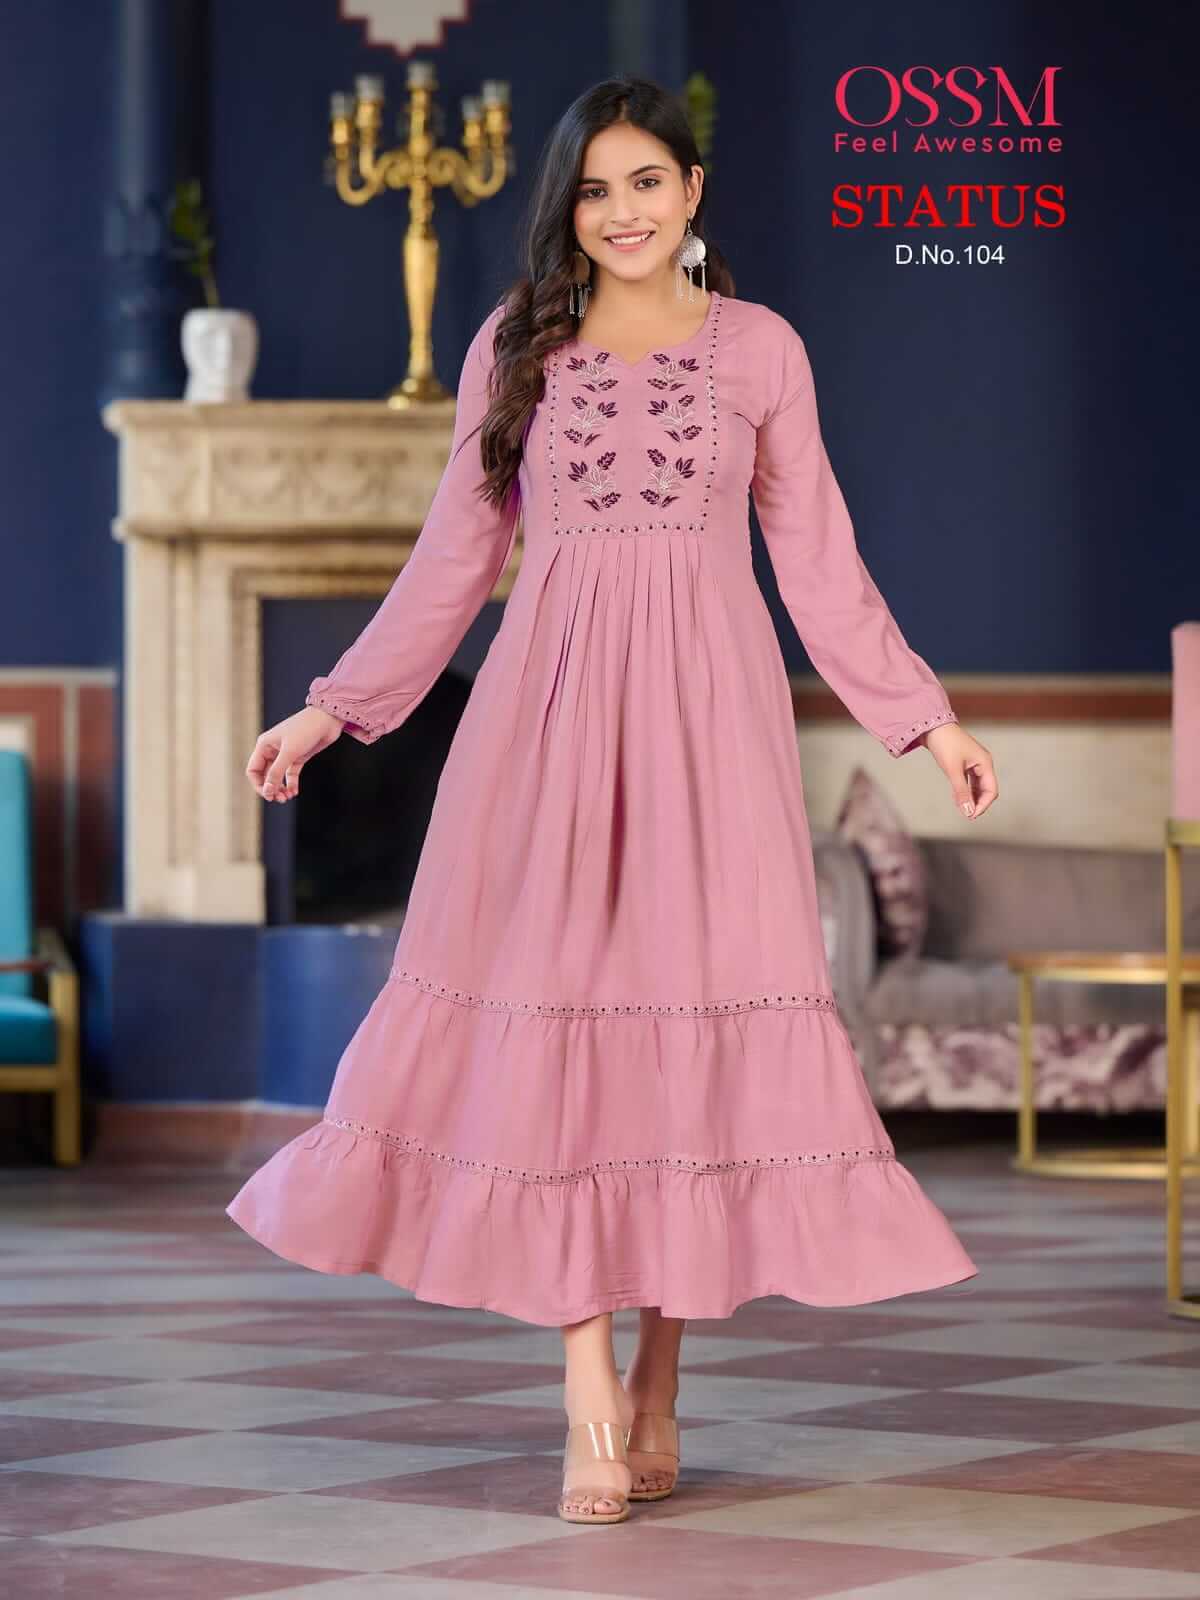 Ossm Status Gowns Catalog collection 1